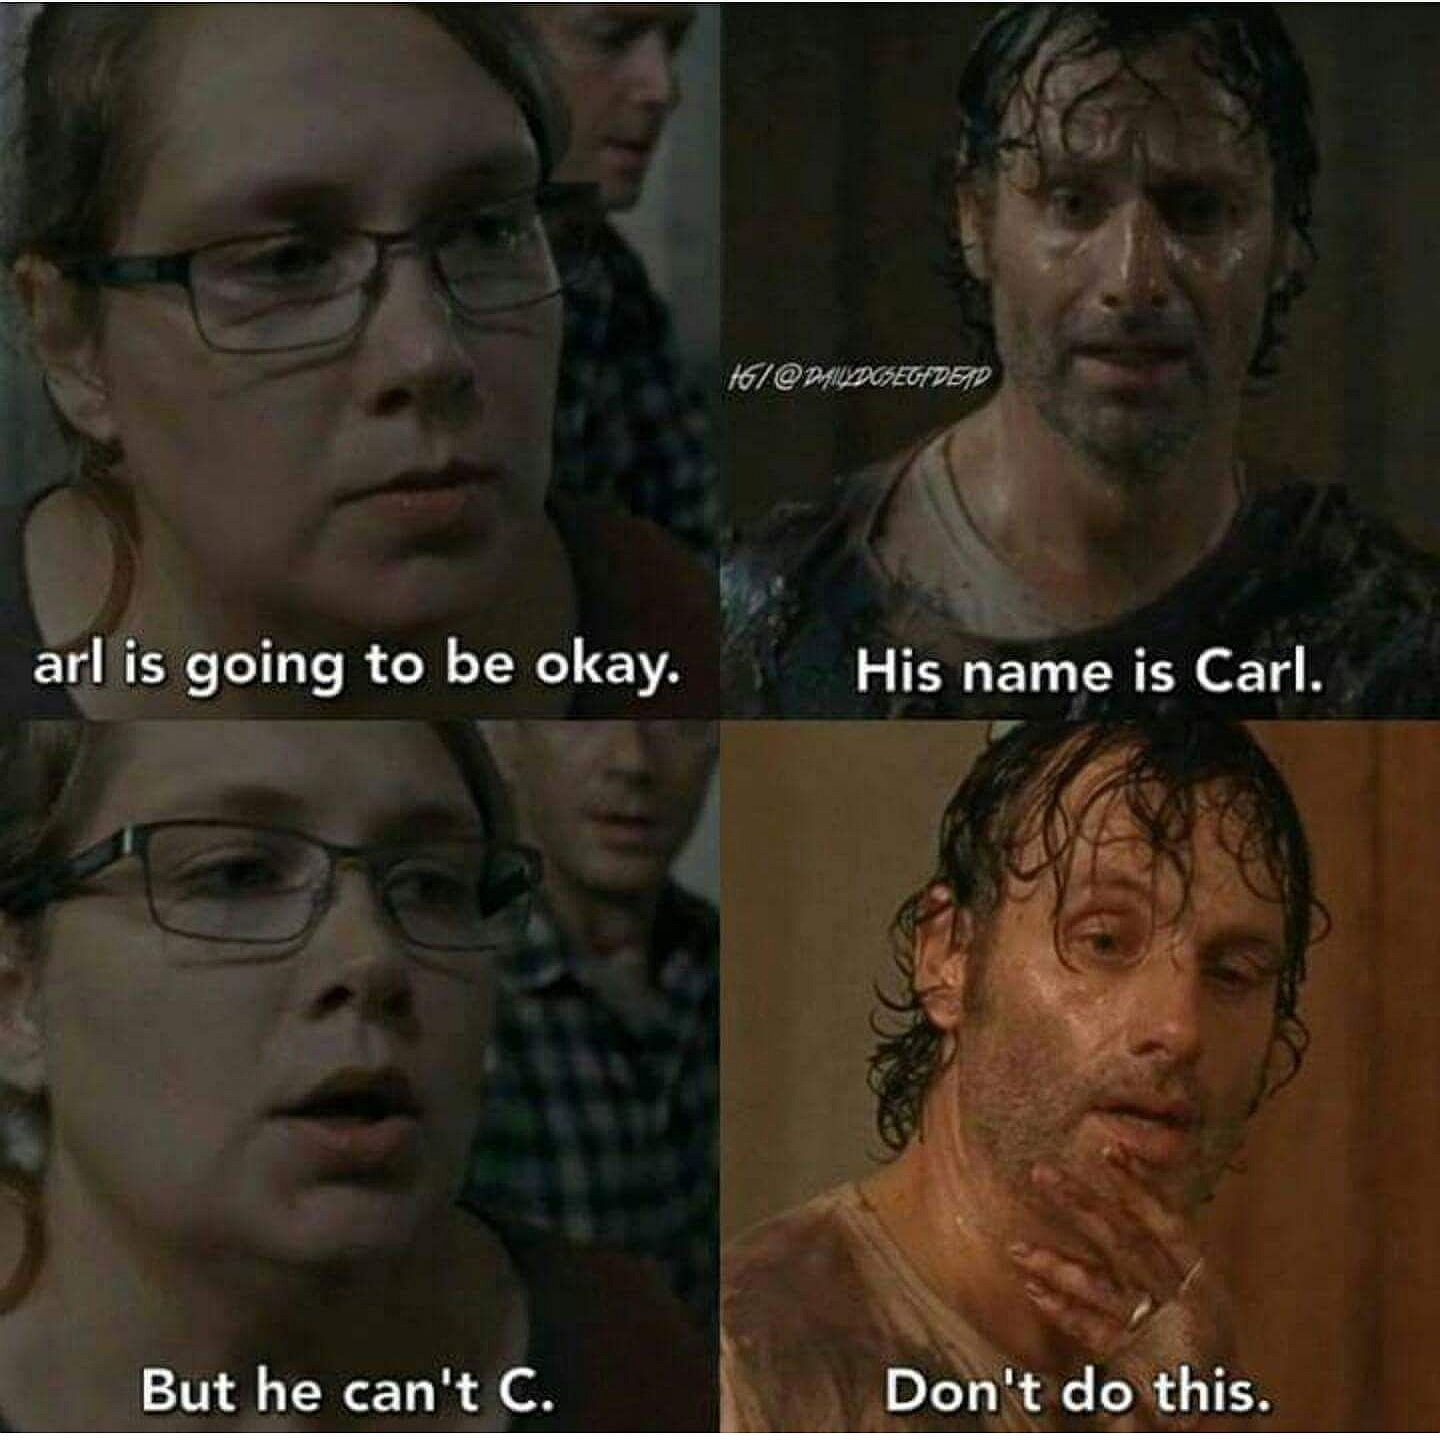 Another &quot;TWD&quot; Dad Humor example.